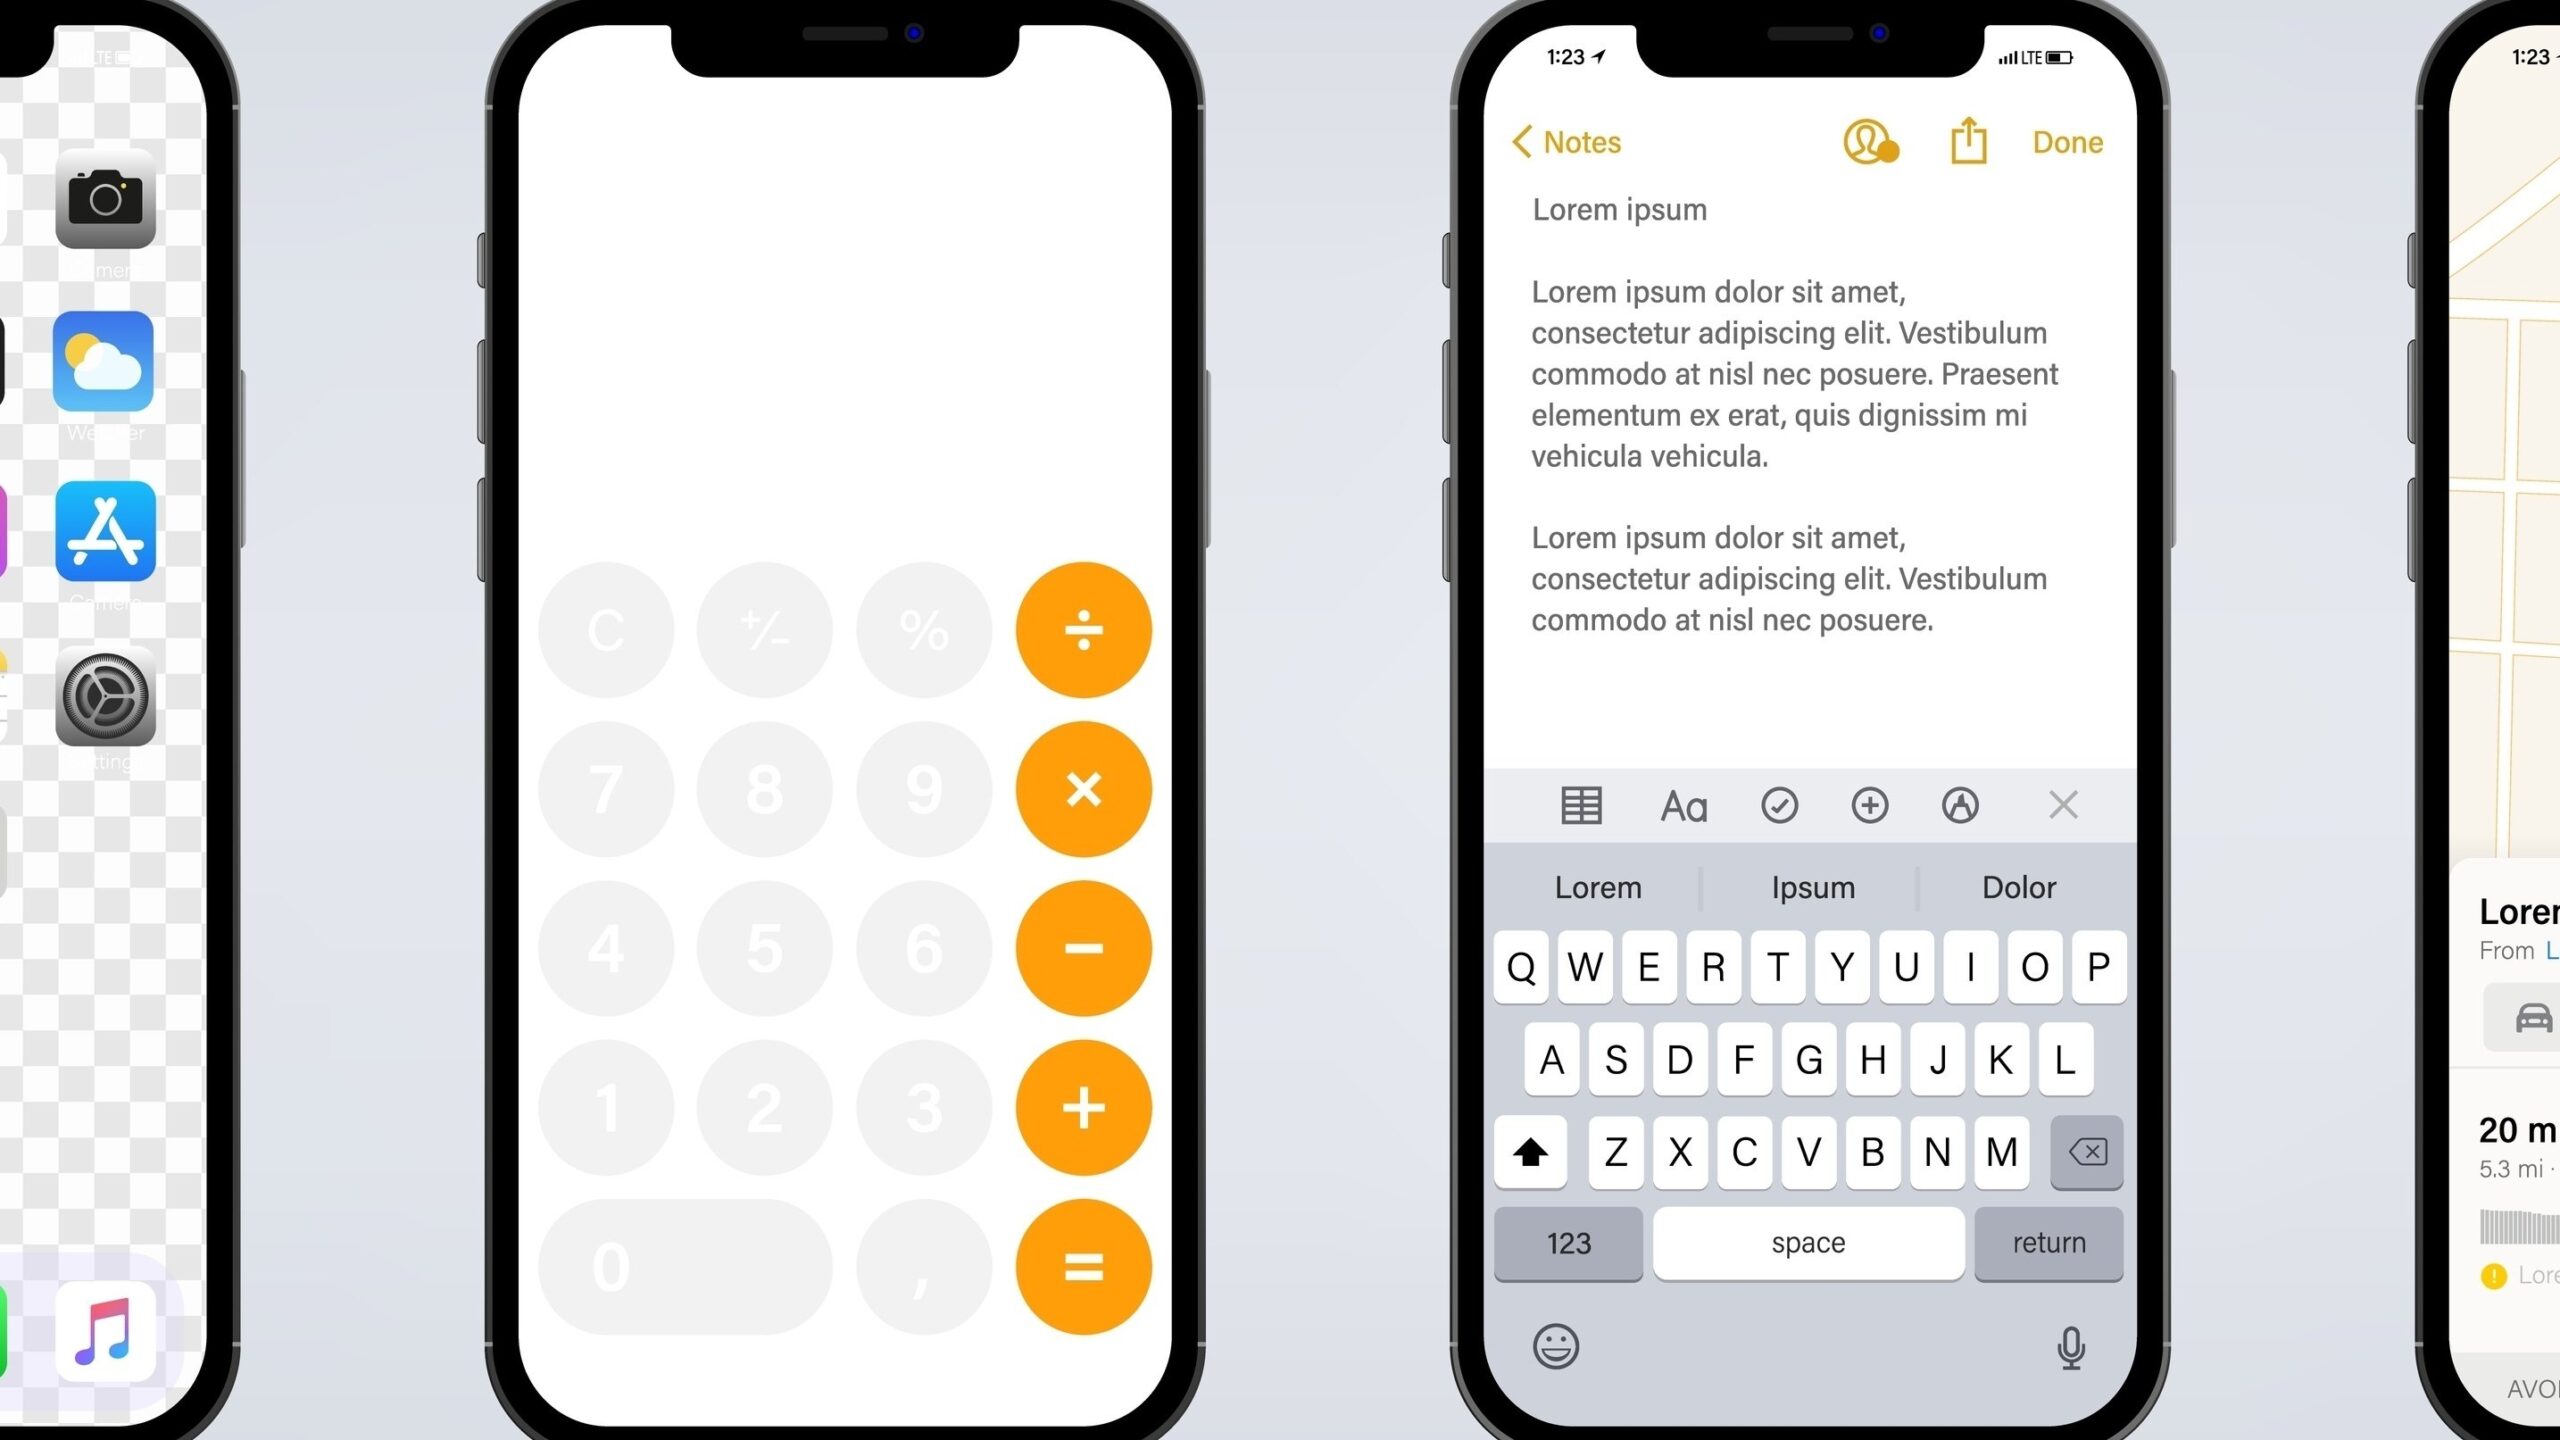 Calculator app and Notes app on iOS